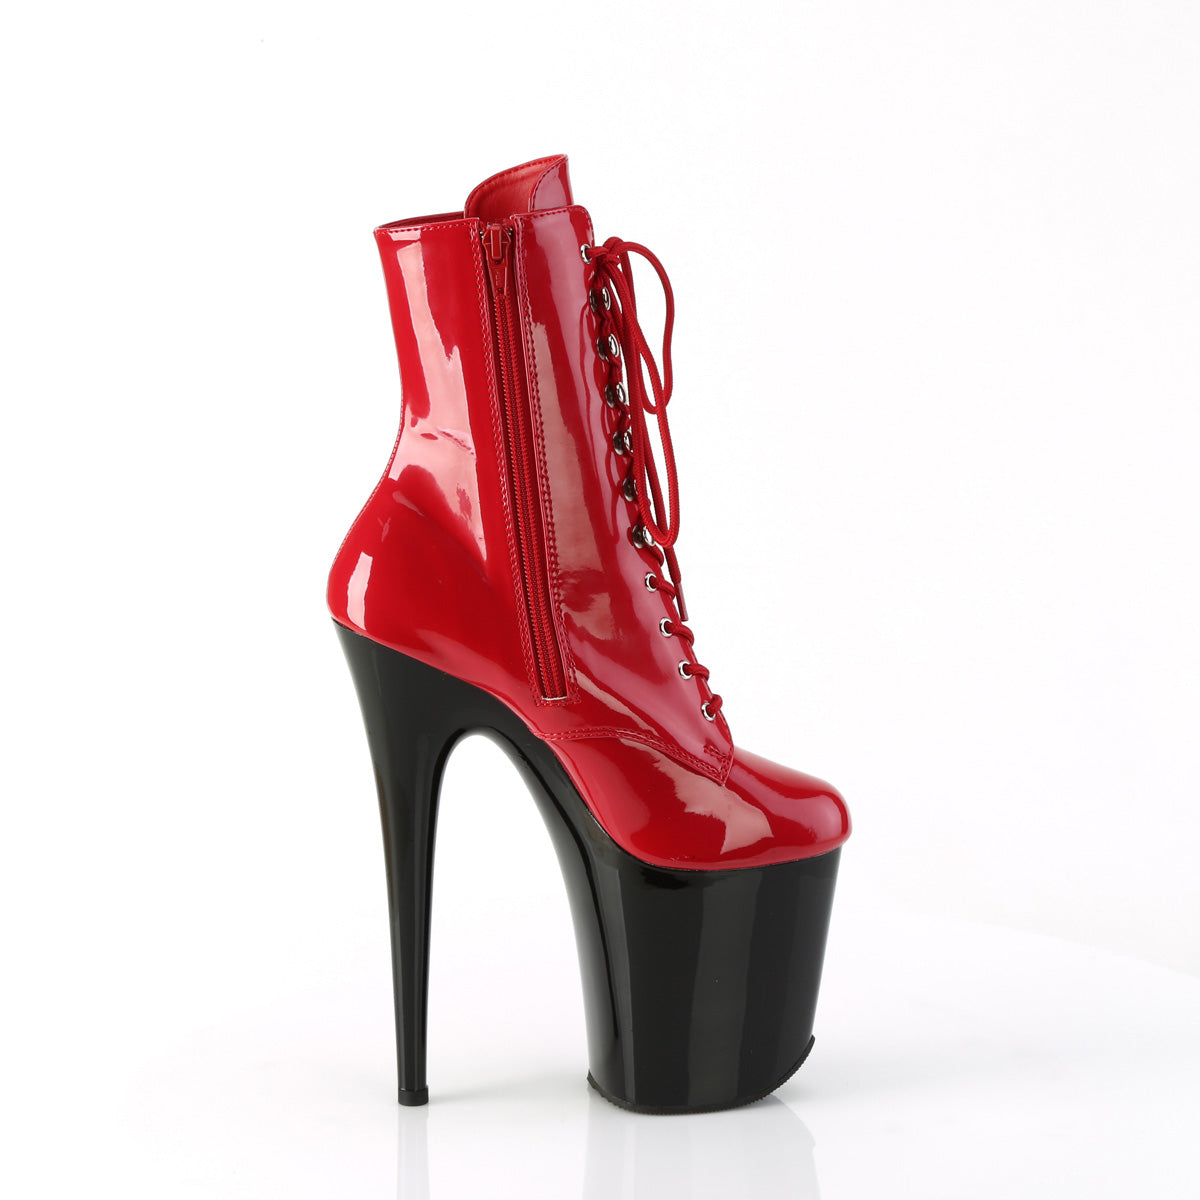 FLAMINGO-1020 Red/Black Ankle Boots